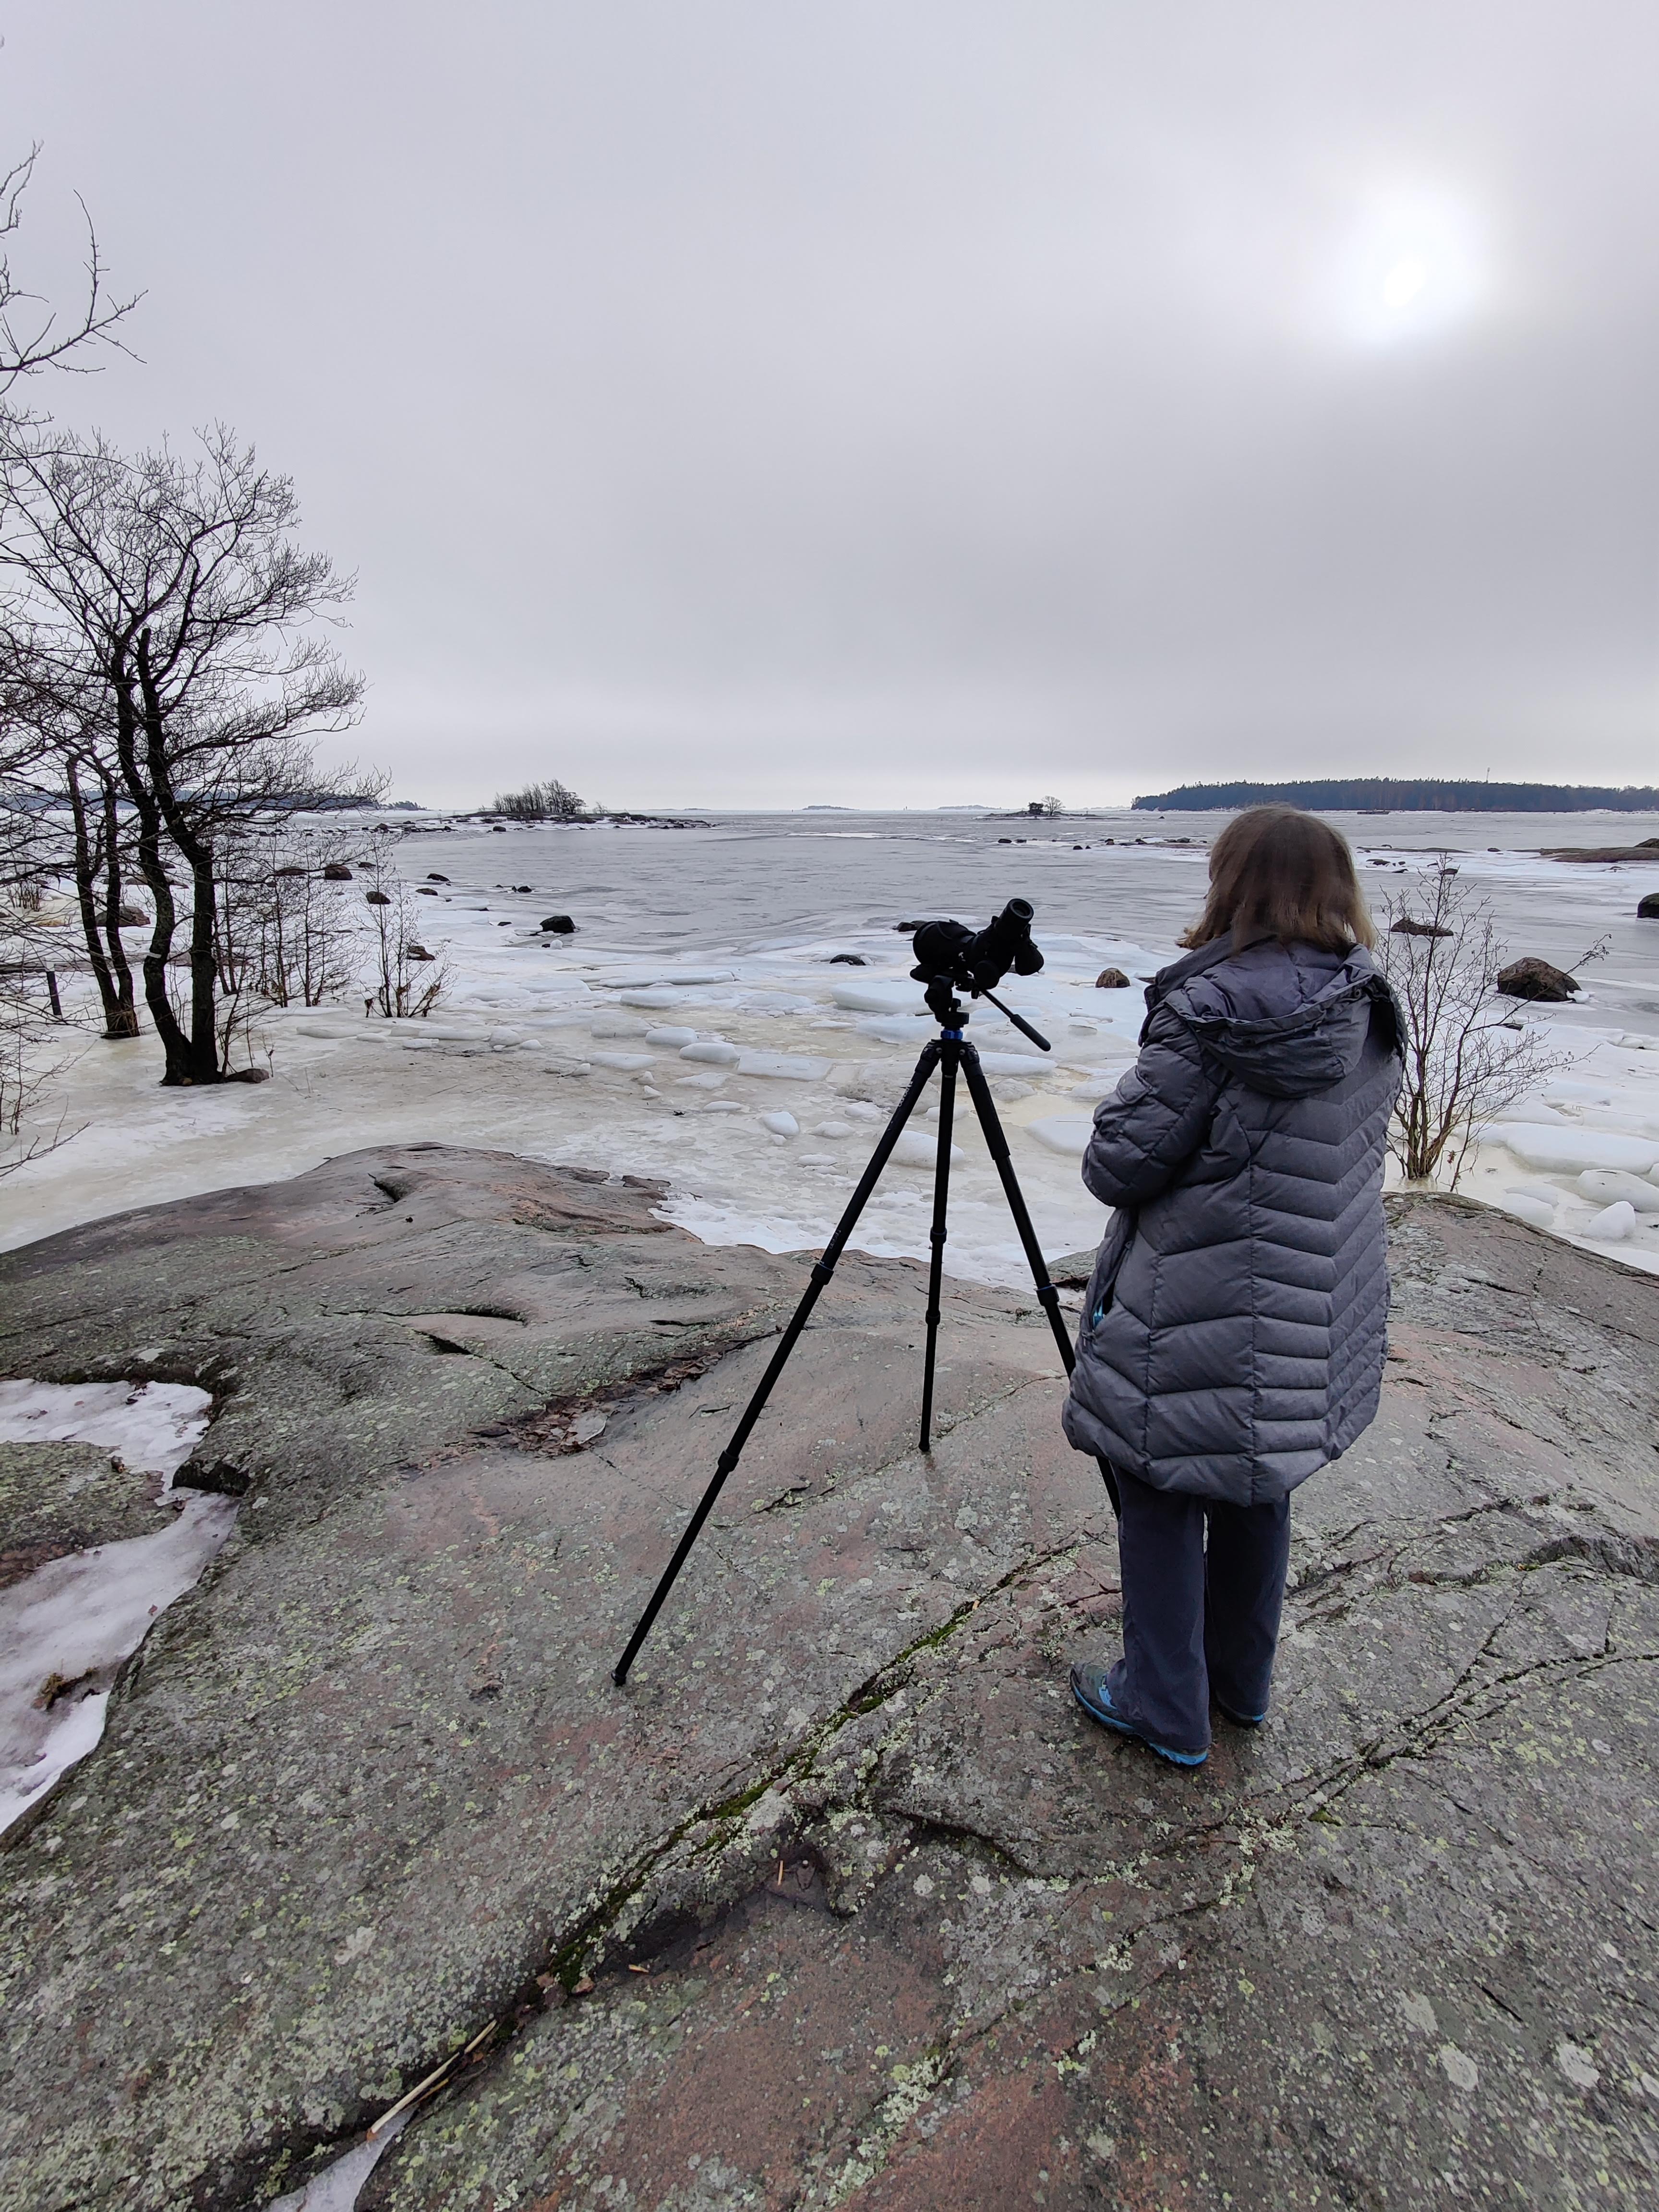 Coastal birding in Helsinki in early spring, with the sea ice starting to break up